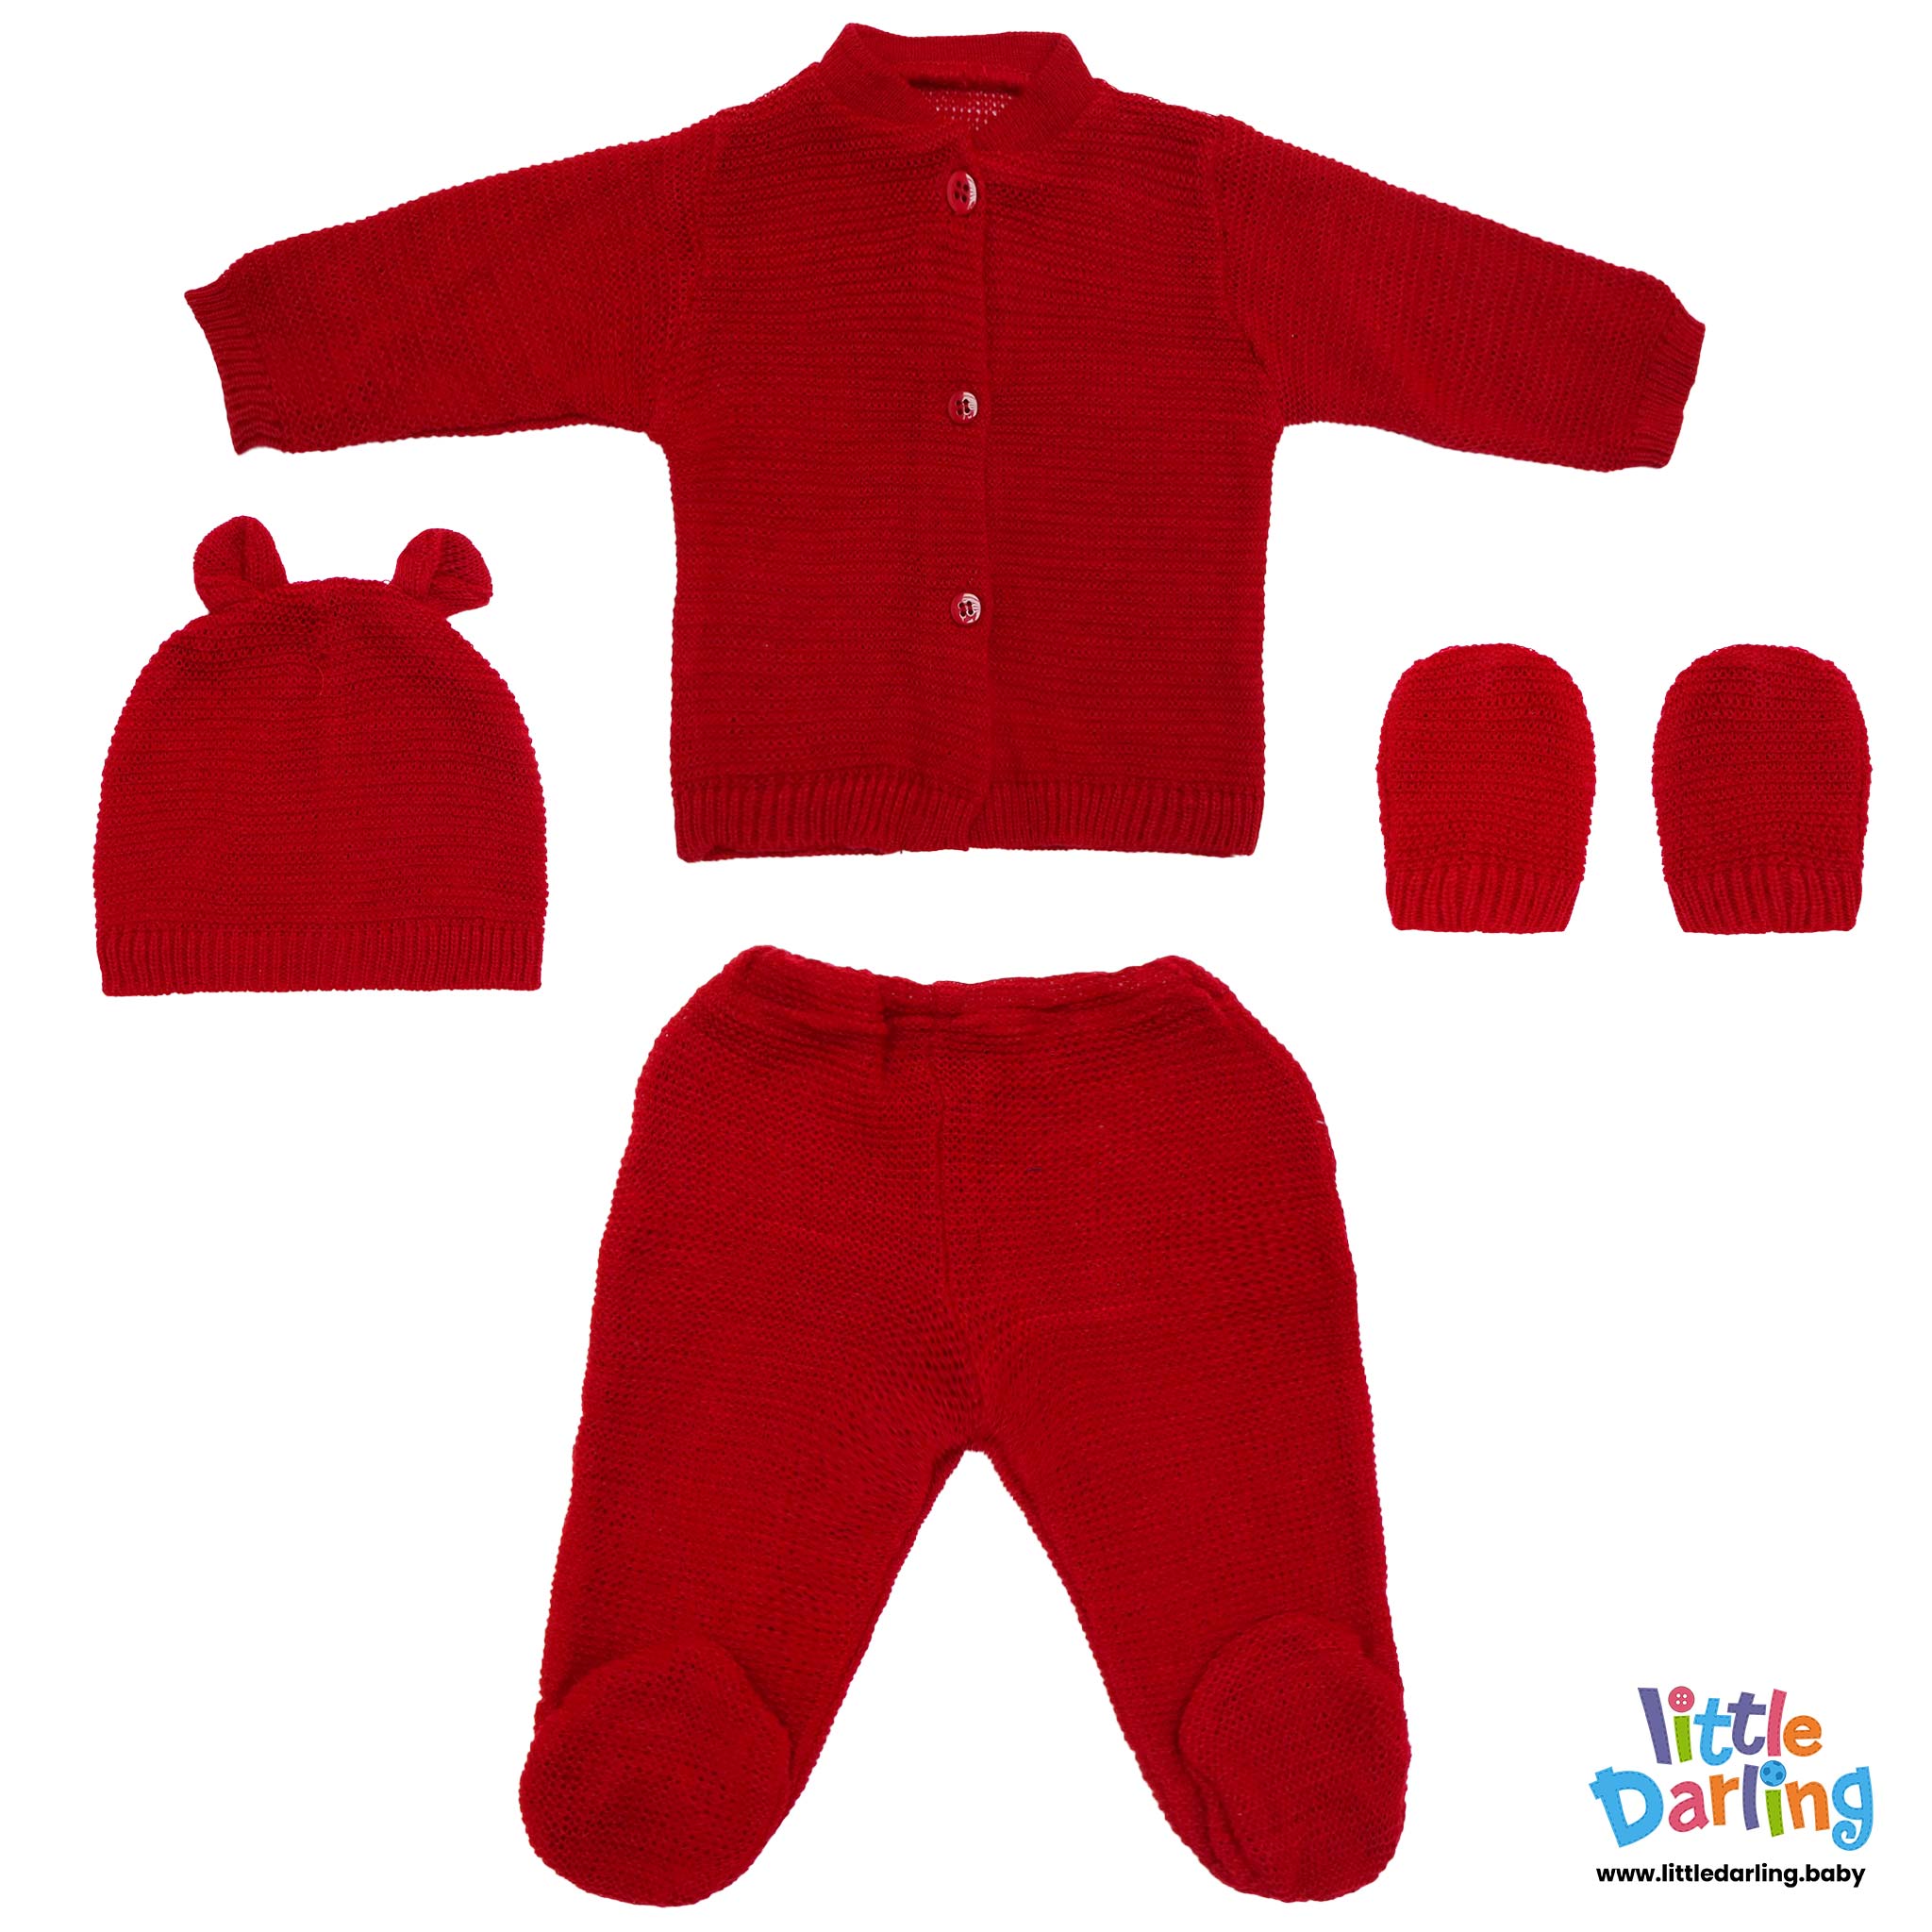 4 Pcs Woolen Gift Set Red Color by Little Darling